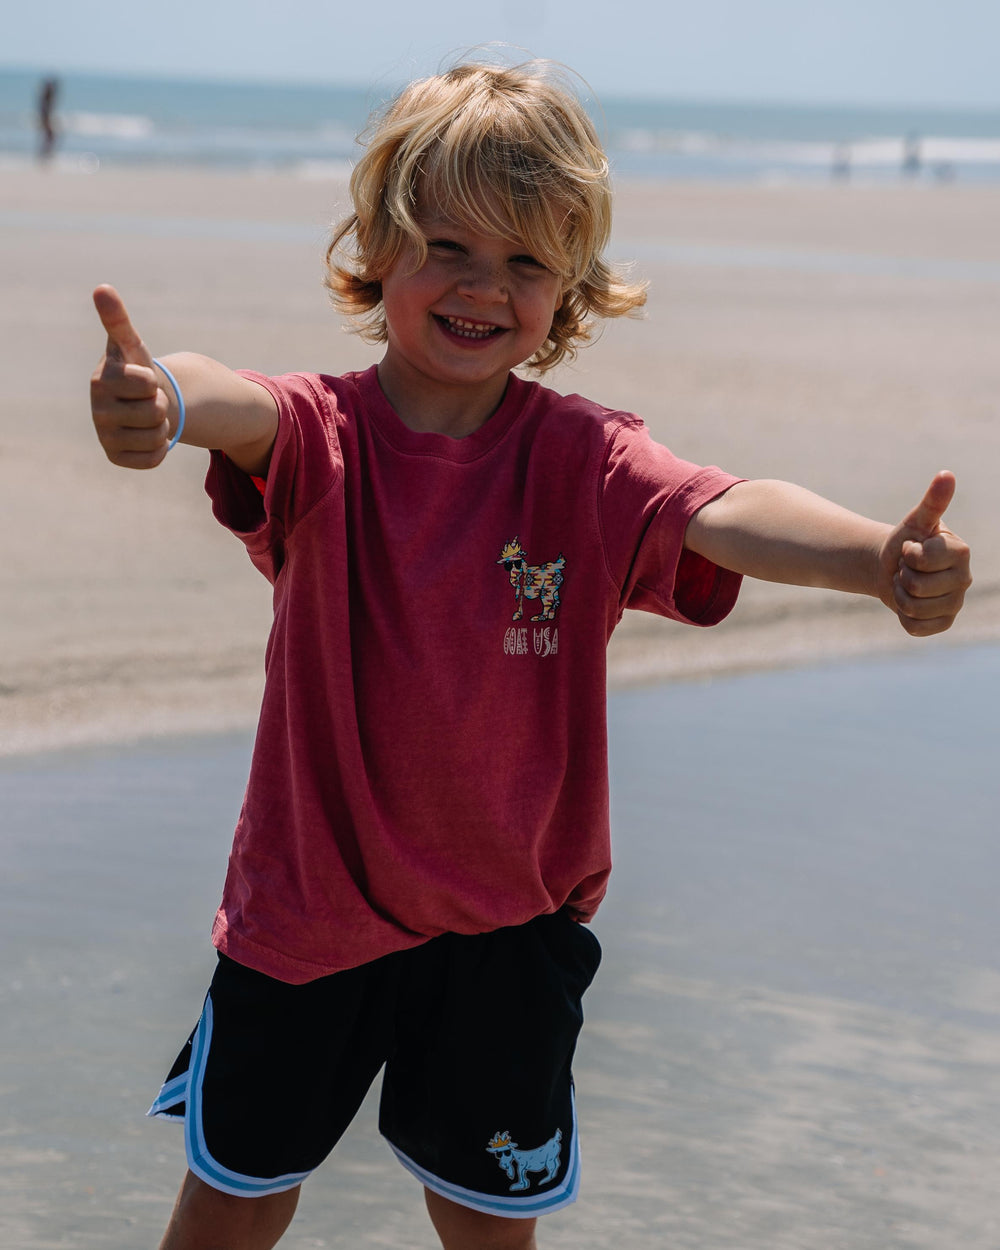 Kid smiling with two thumbs up on a beach